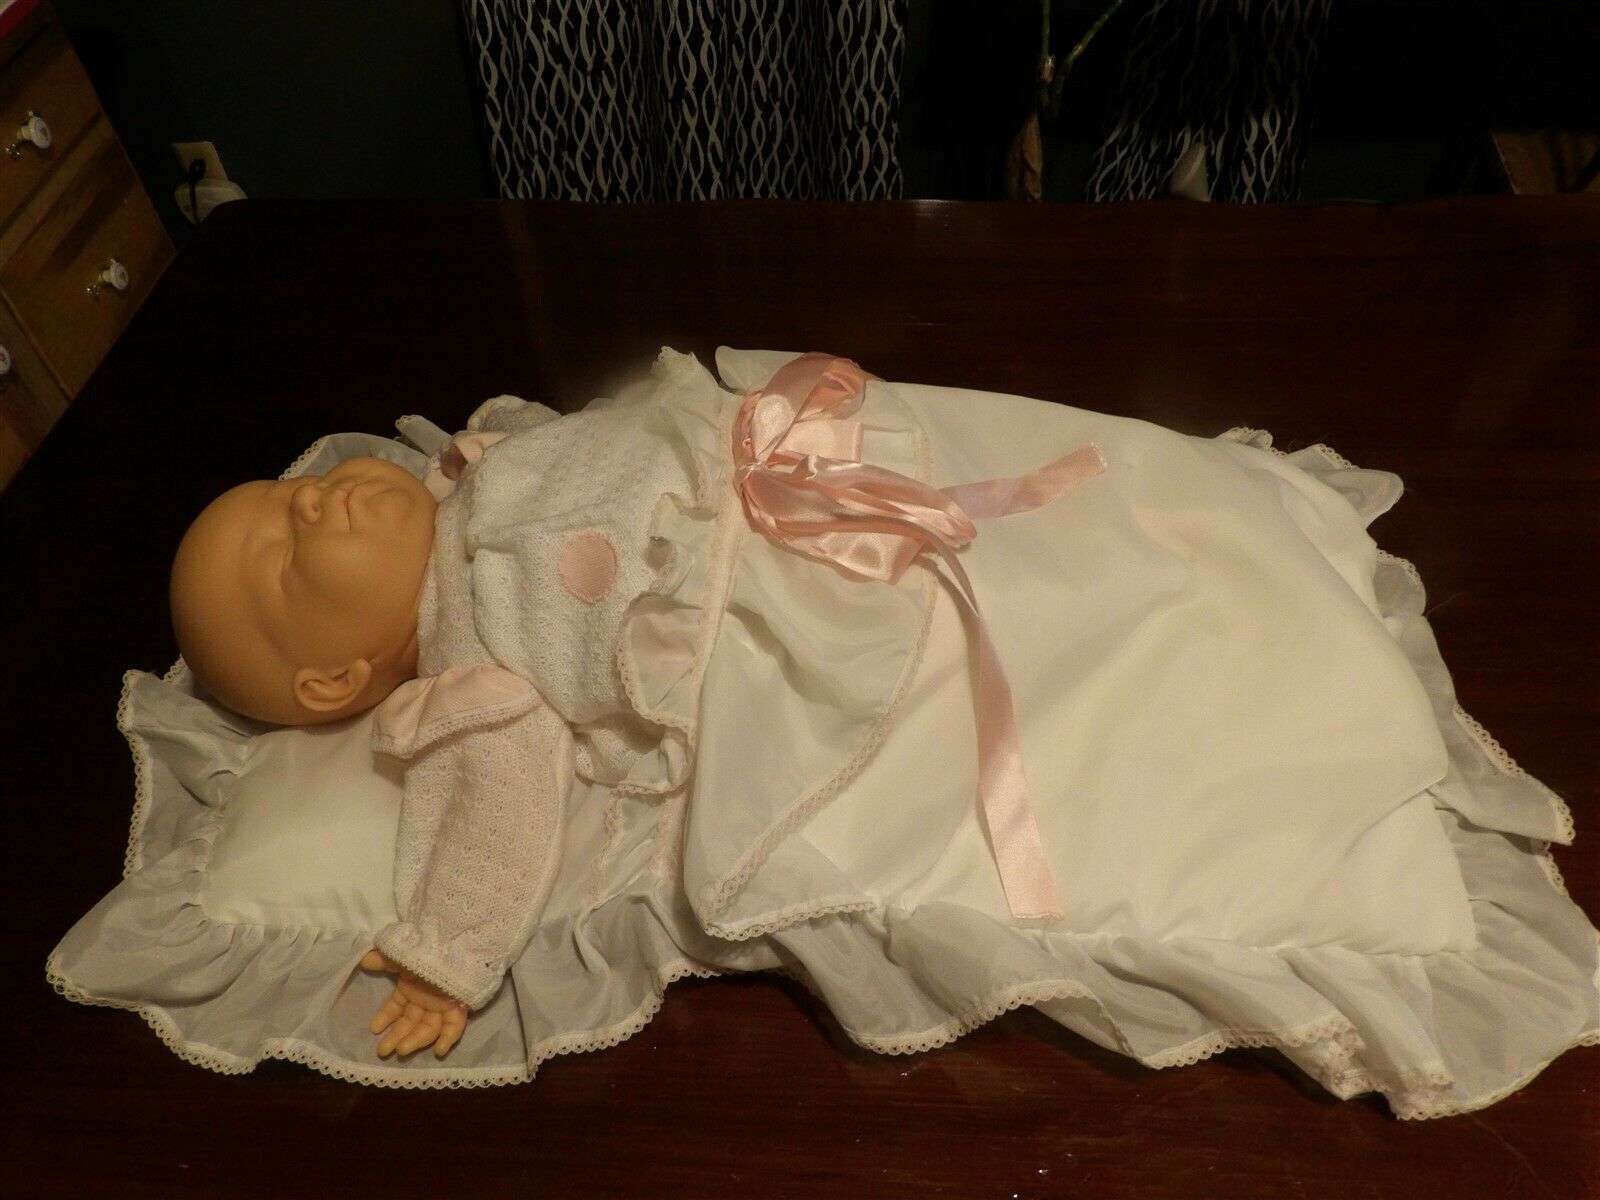 Gorgeous 21" Berjusa Moving Sleeping Newborn W/ Outfit & Blanket Pull String